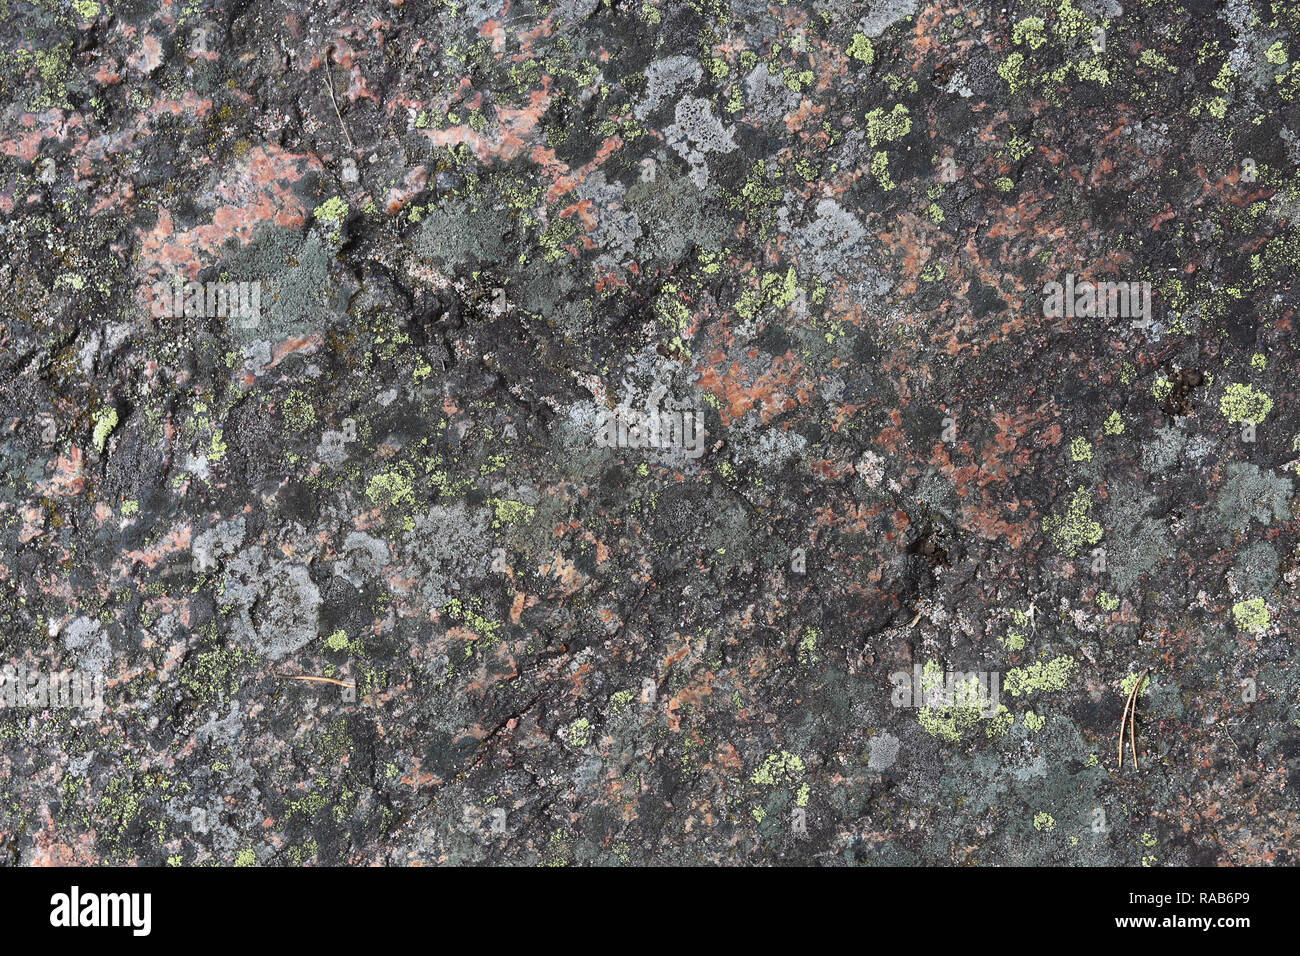 Colorful rock in a closeup. You can see the texture of the rock and some lichen and other small plants growing on top of it. Stock Photo